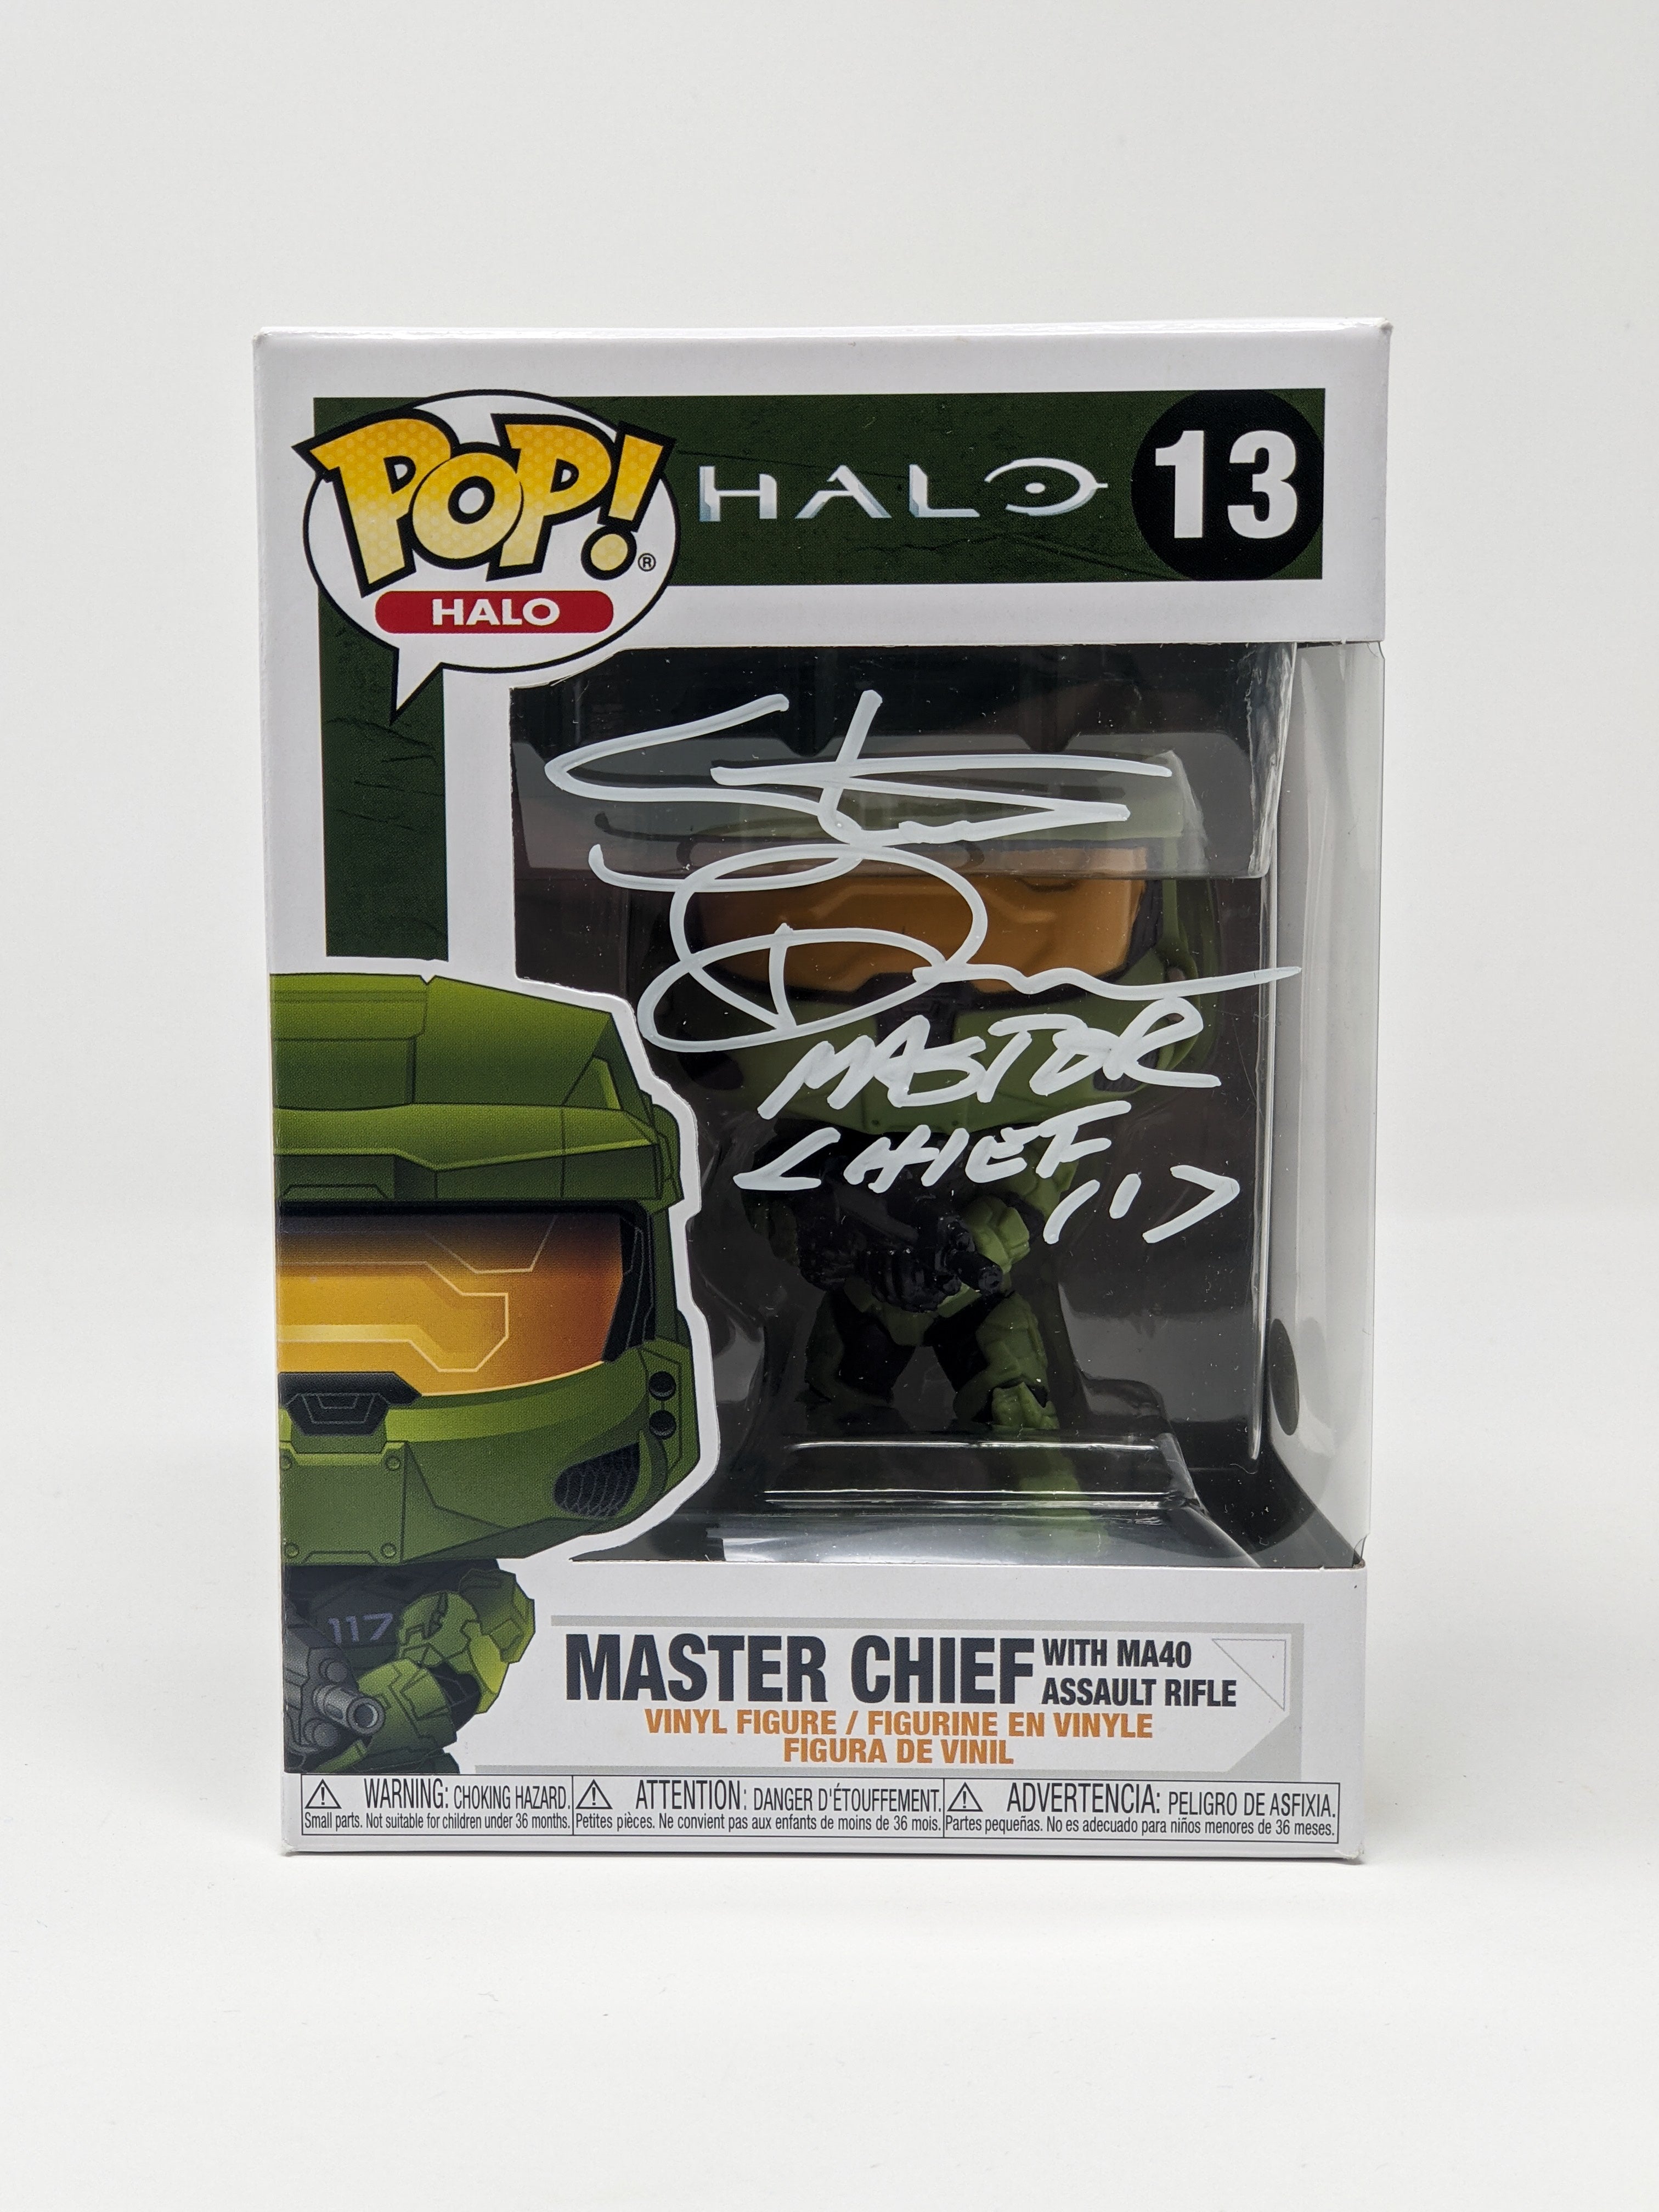 Steve Downes Halo Master Chief MA40 Assault Rifle #13 Signed Funko Pop JSA Certified Autograph GalaxyCon